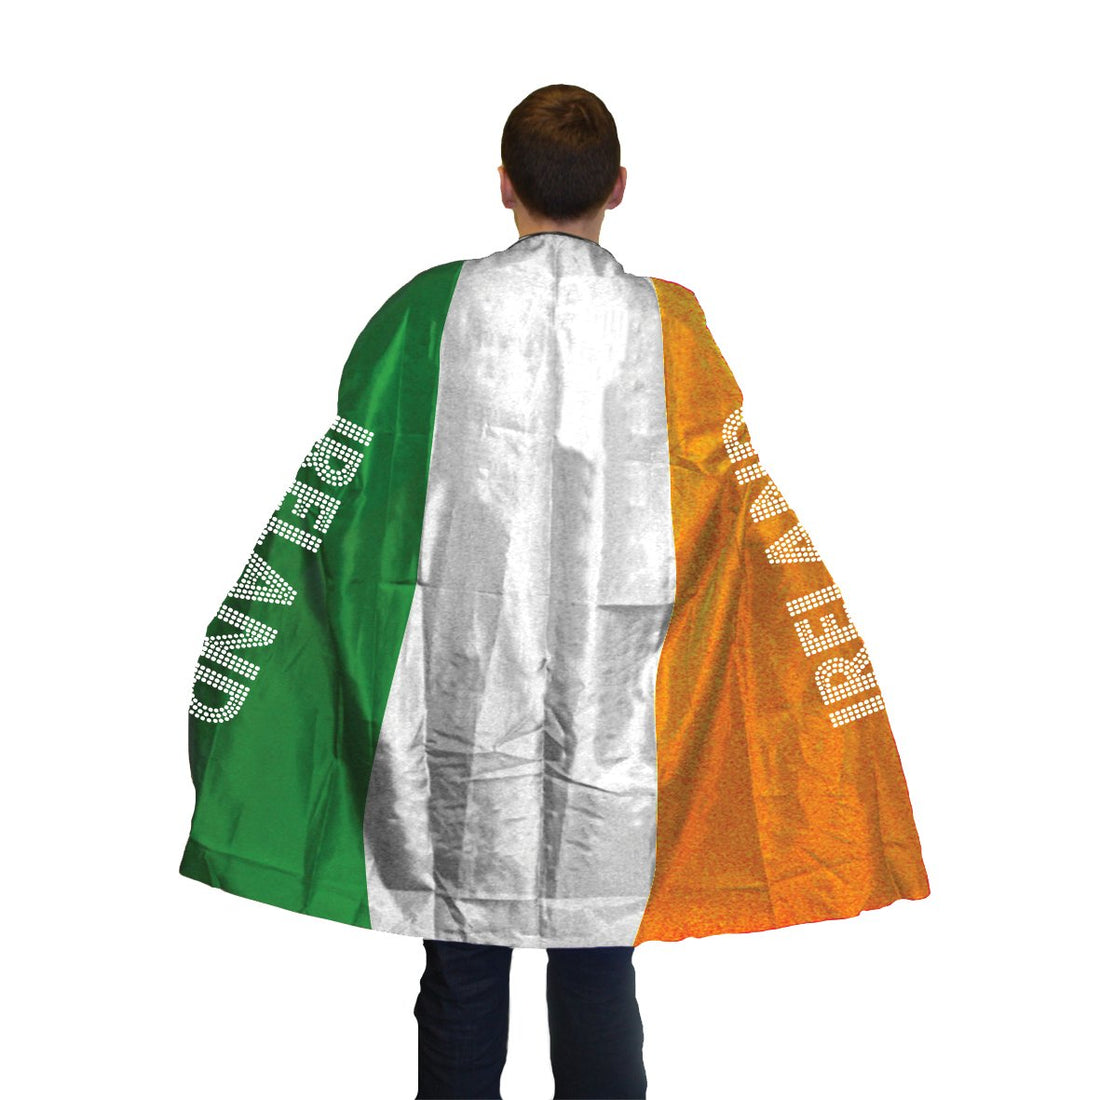 Ireland Flag Body Cape - One size fits all